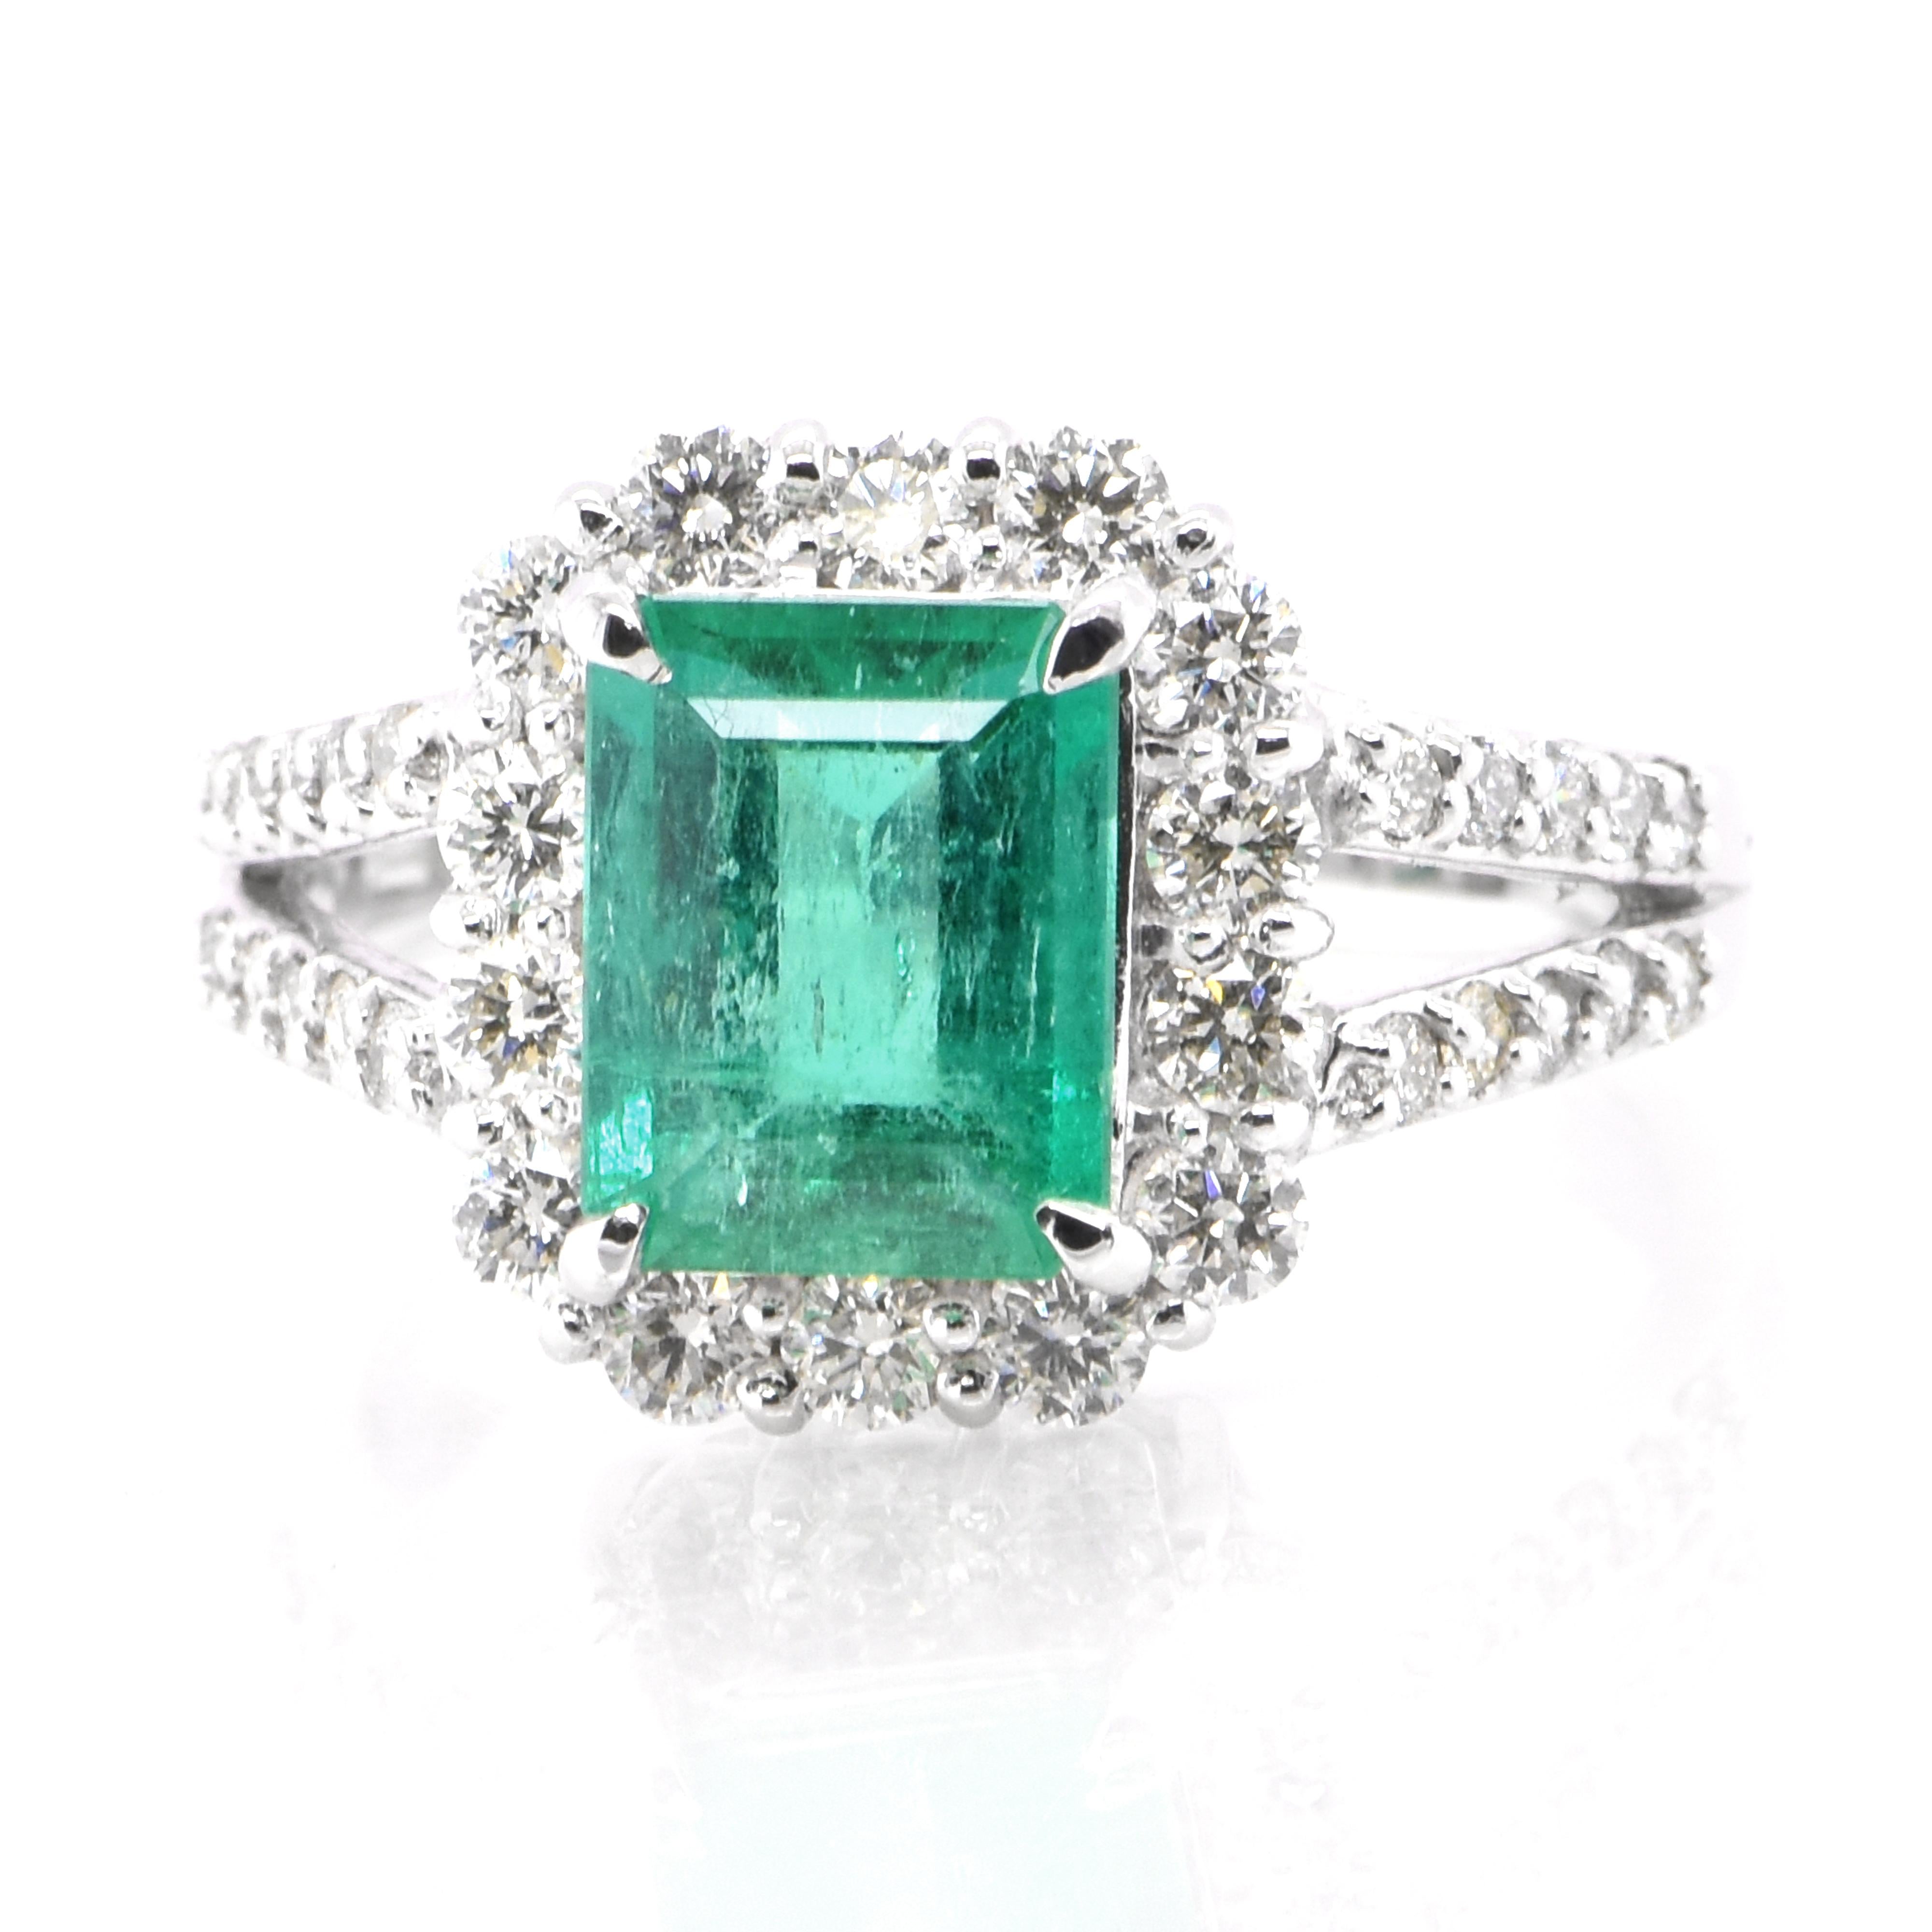 A stunning ring featuring a 1.64 Carat Natural Emerald and 0.77 Carats of Diamond Accents set in Platinum. People have admired emerald’s green for thousands of years. Emeralds have always been associated with the lushest landscapes and the richest